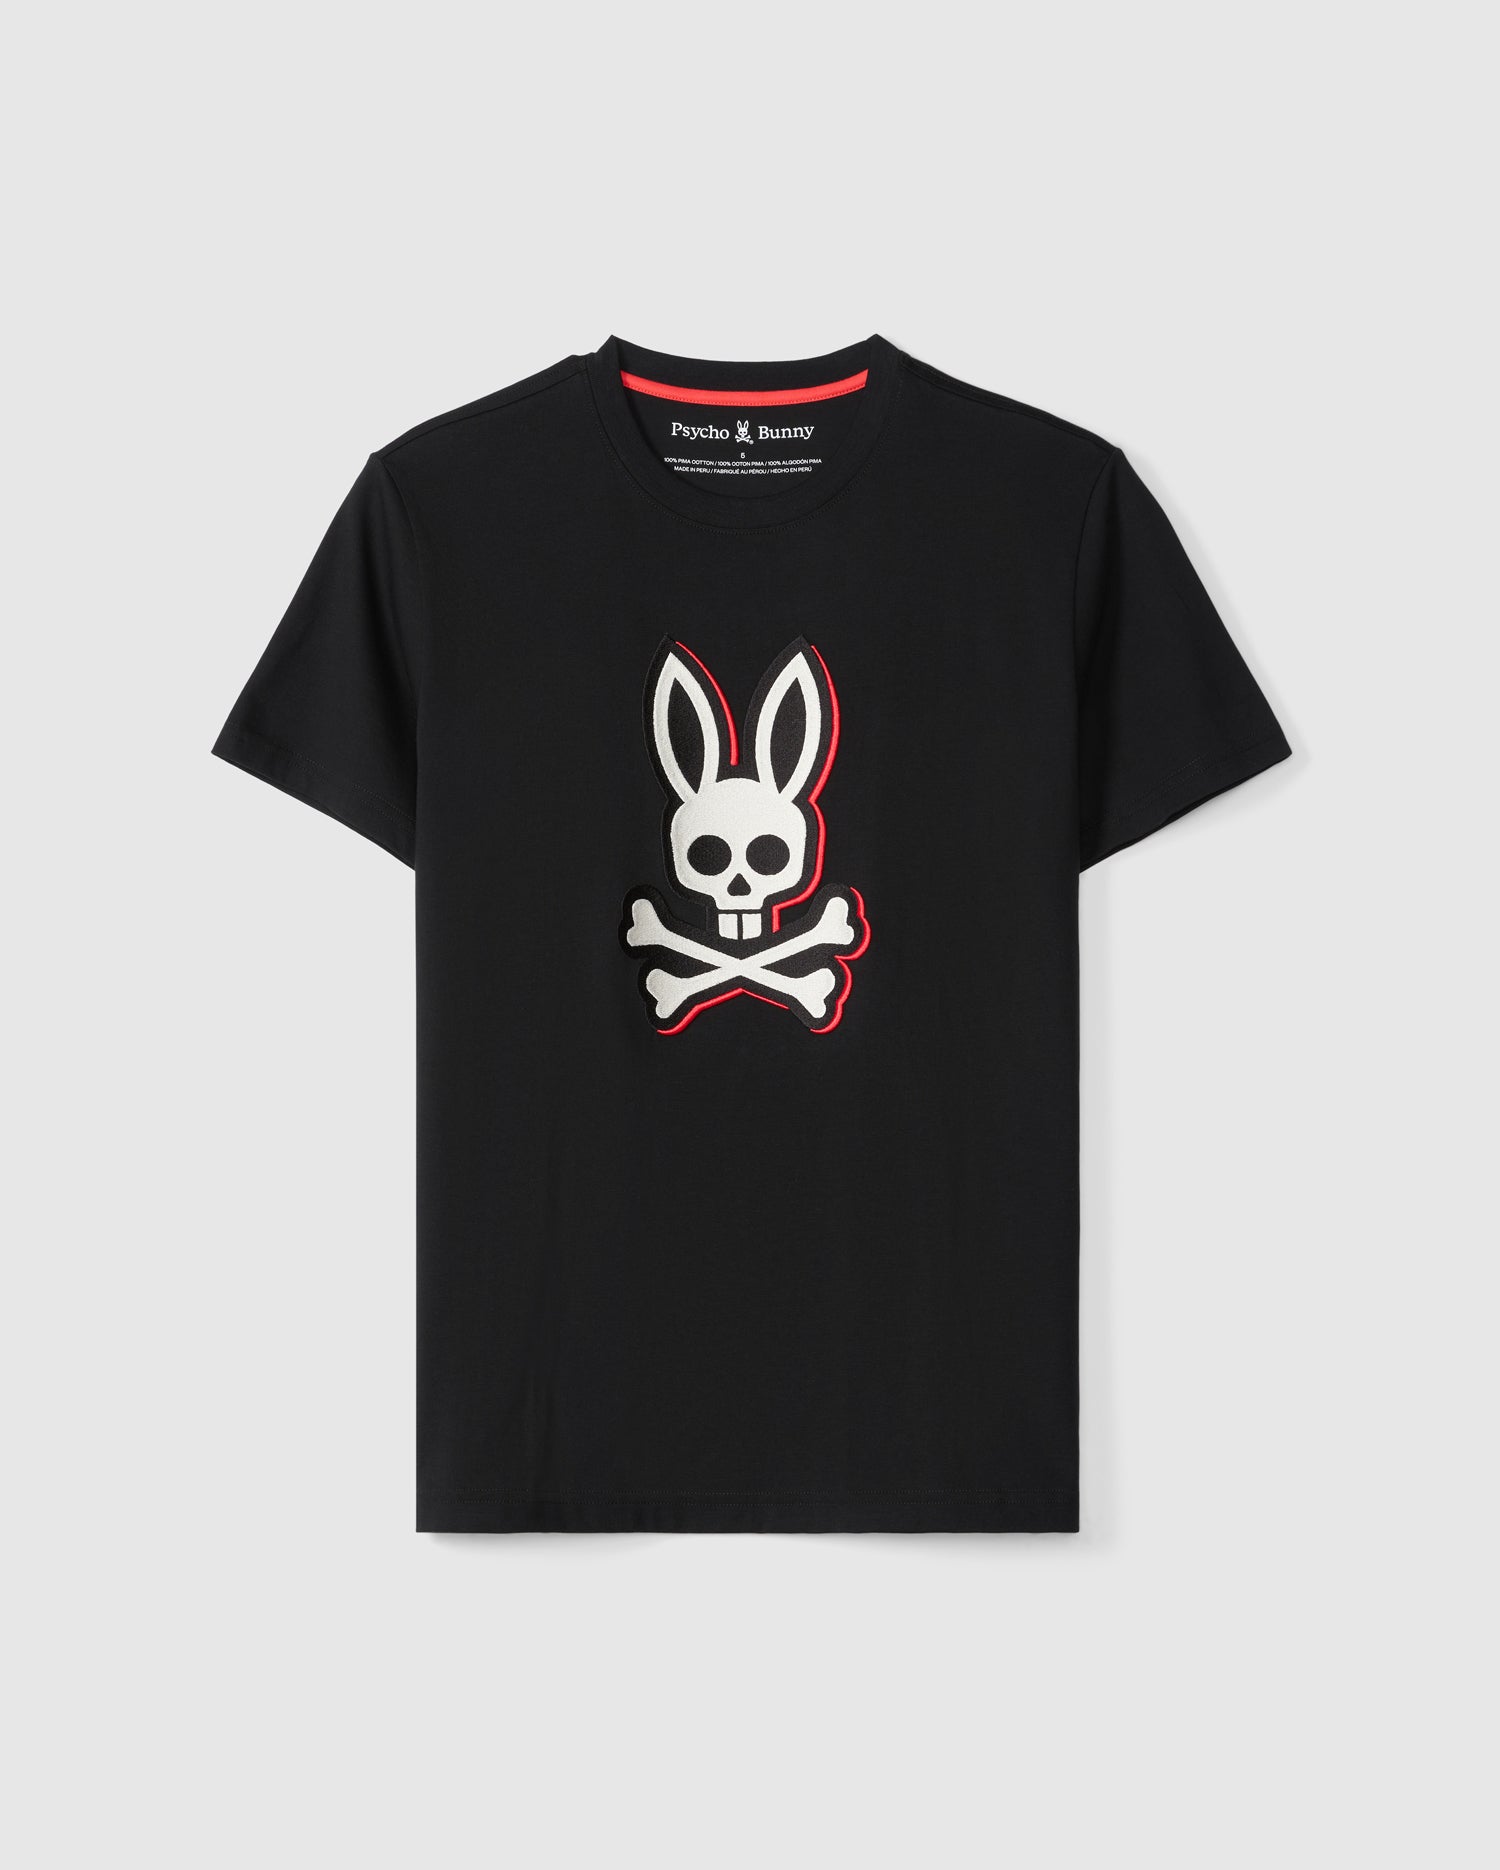 Black MENS KAYDEN GRAPHIC TEE - B6U676C200 featuring a skull with bunny ears above crossed bones on the front. The skull is white with black details, and the T-shirt has a round neckline and short sleeves. Made from Pima cotton, it has the brand name 